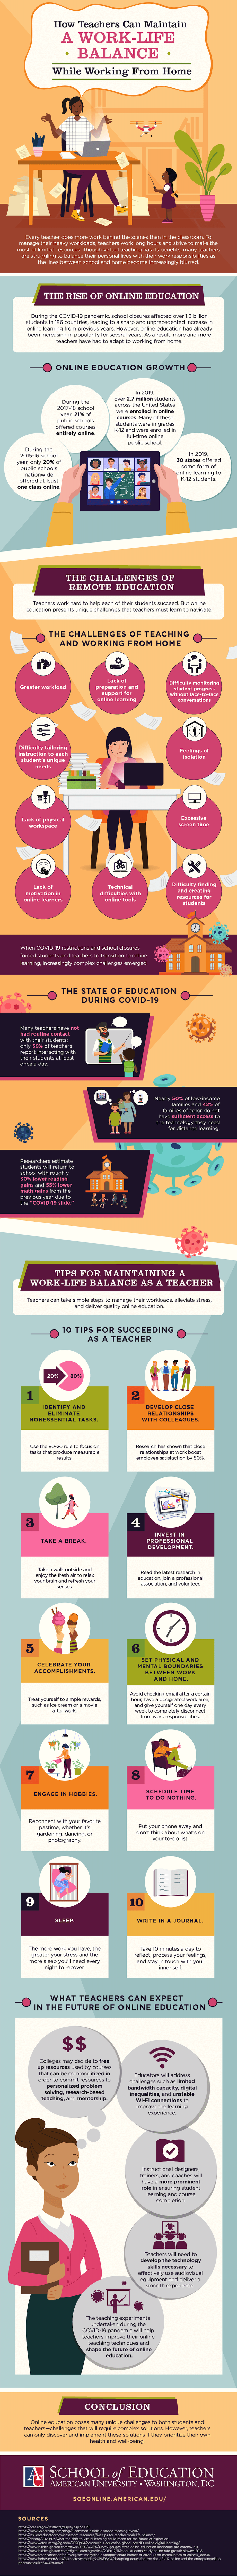 Teacher work life balance: Tips for managing workload and stress while teaching online or in person.